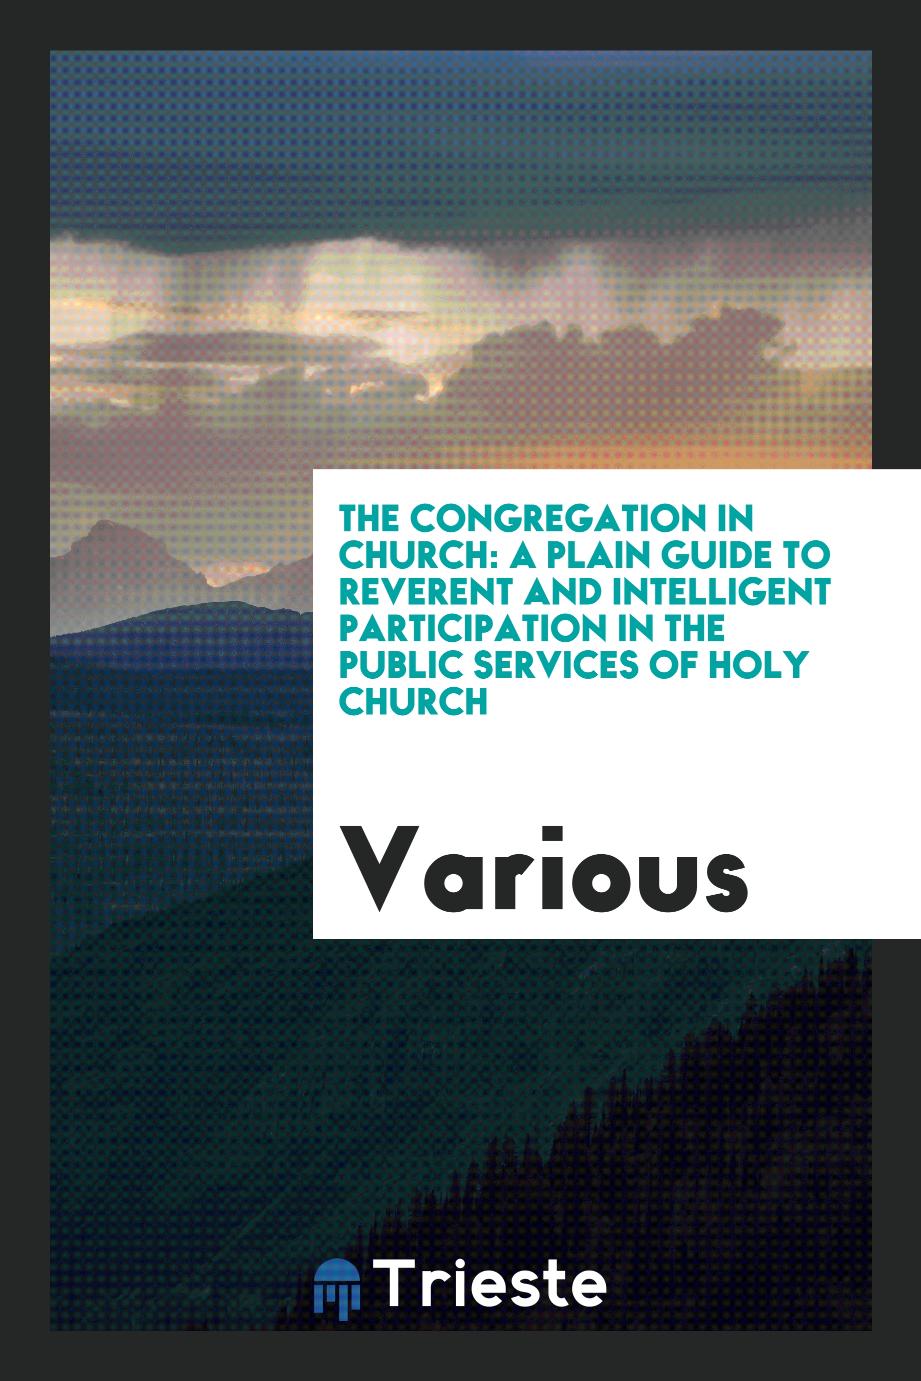 The Congregation in church: a plain guide to reverent and intelligent participation in the public services of Holy Church